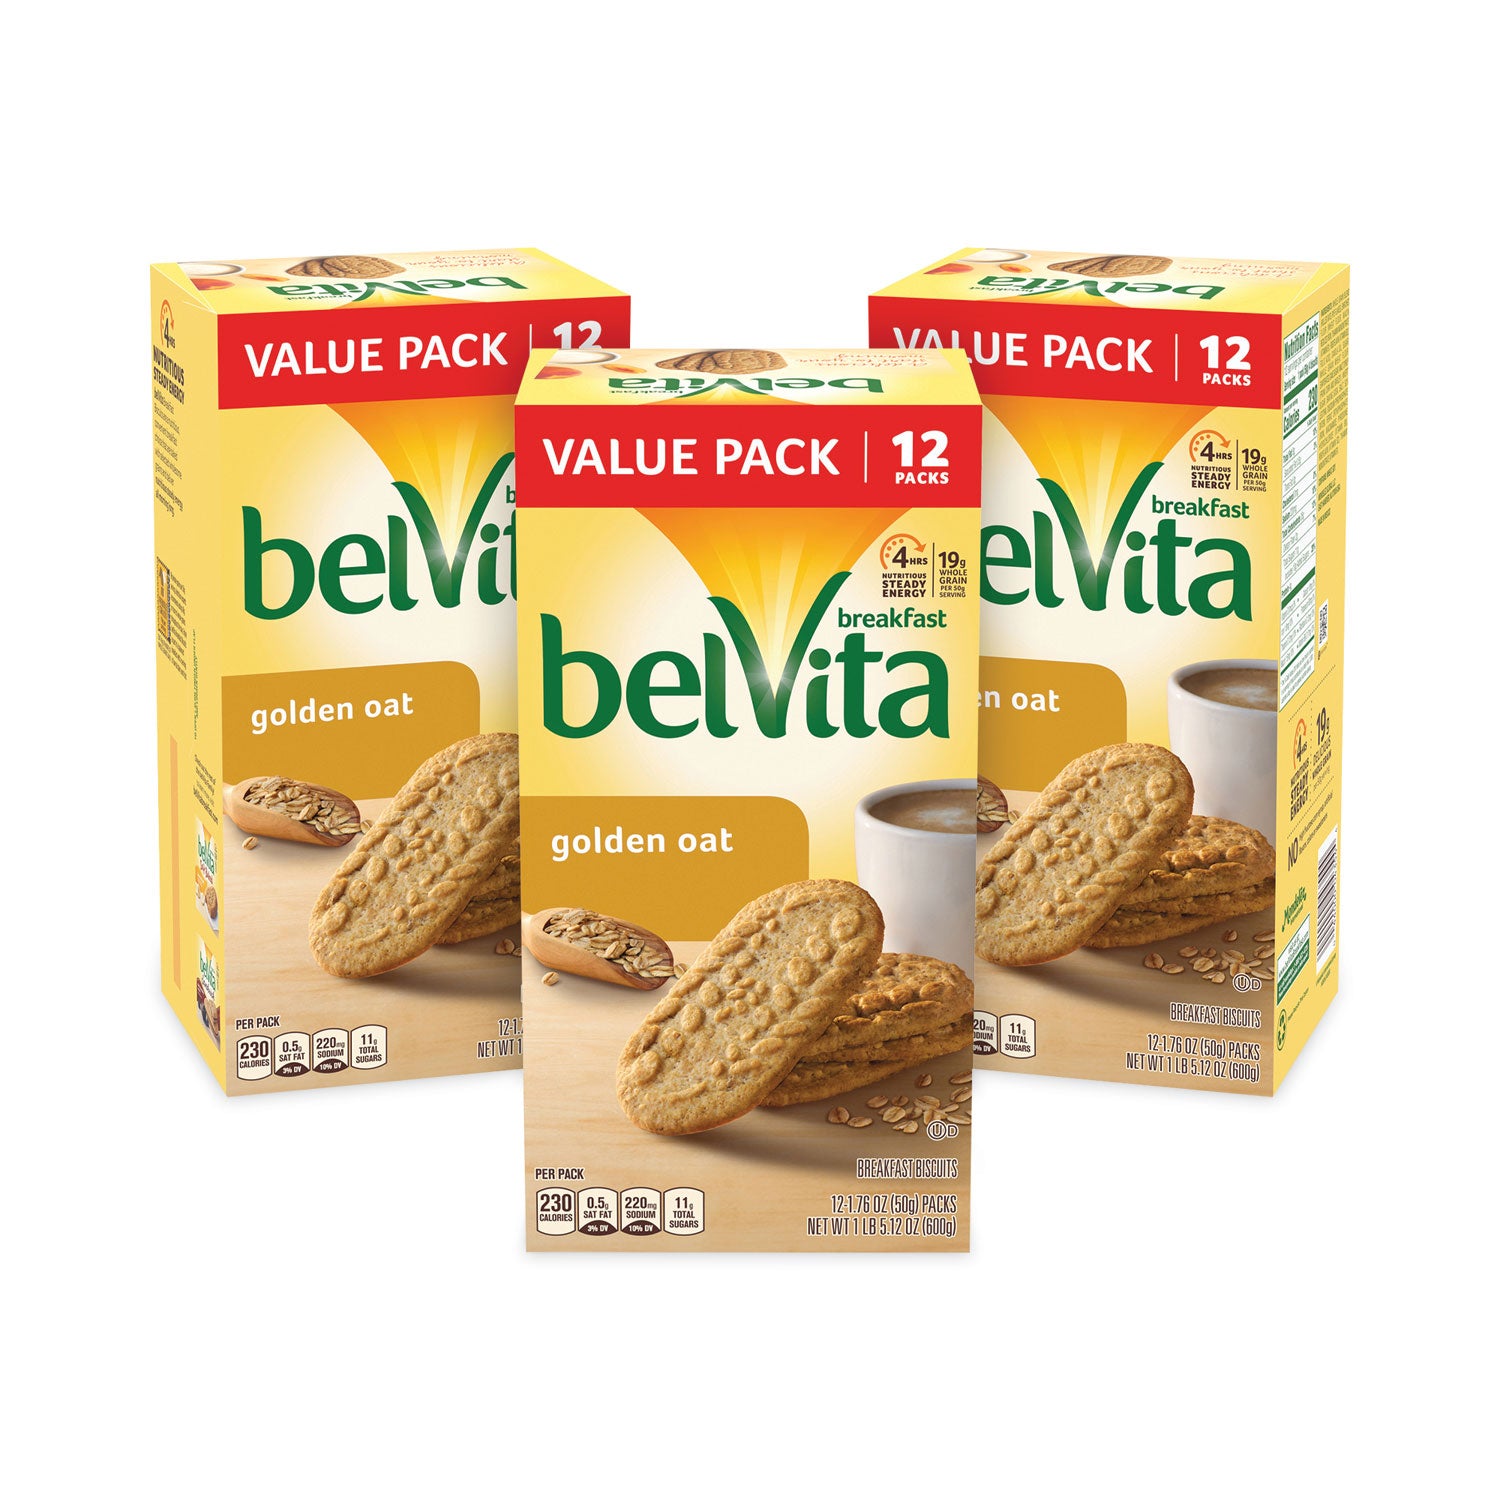 belvita-breakfast-biscuits-golden-oat-176-oz-packet-of-4-12-packets-box-3-boxes-carton-ships-in-1-3-business-days_grr30700147 - 2